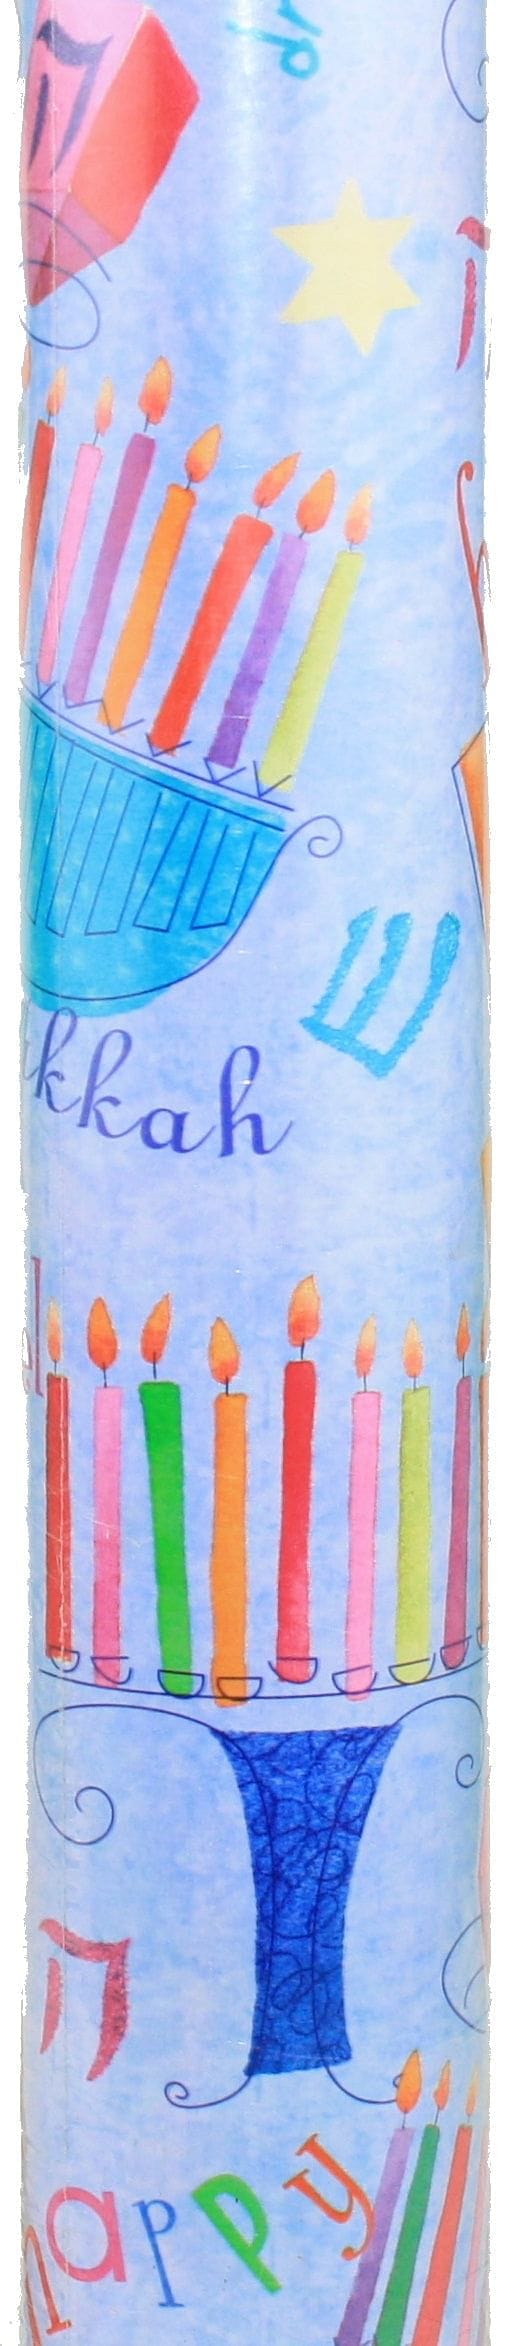 Happy Hanukah Wrapping Paper - Shelburne Country Store